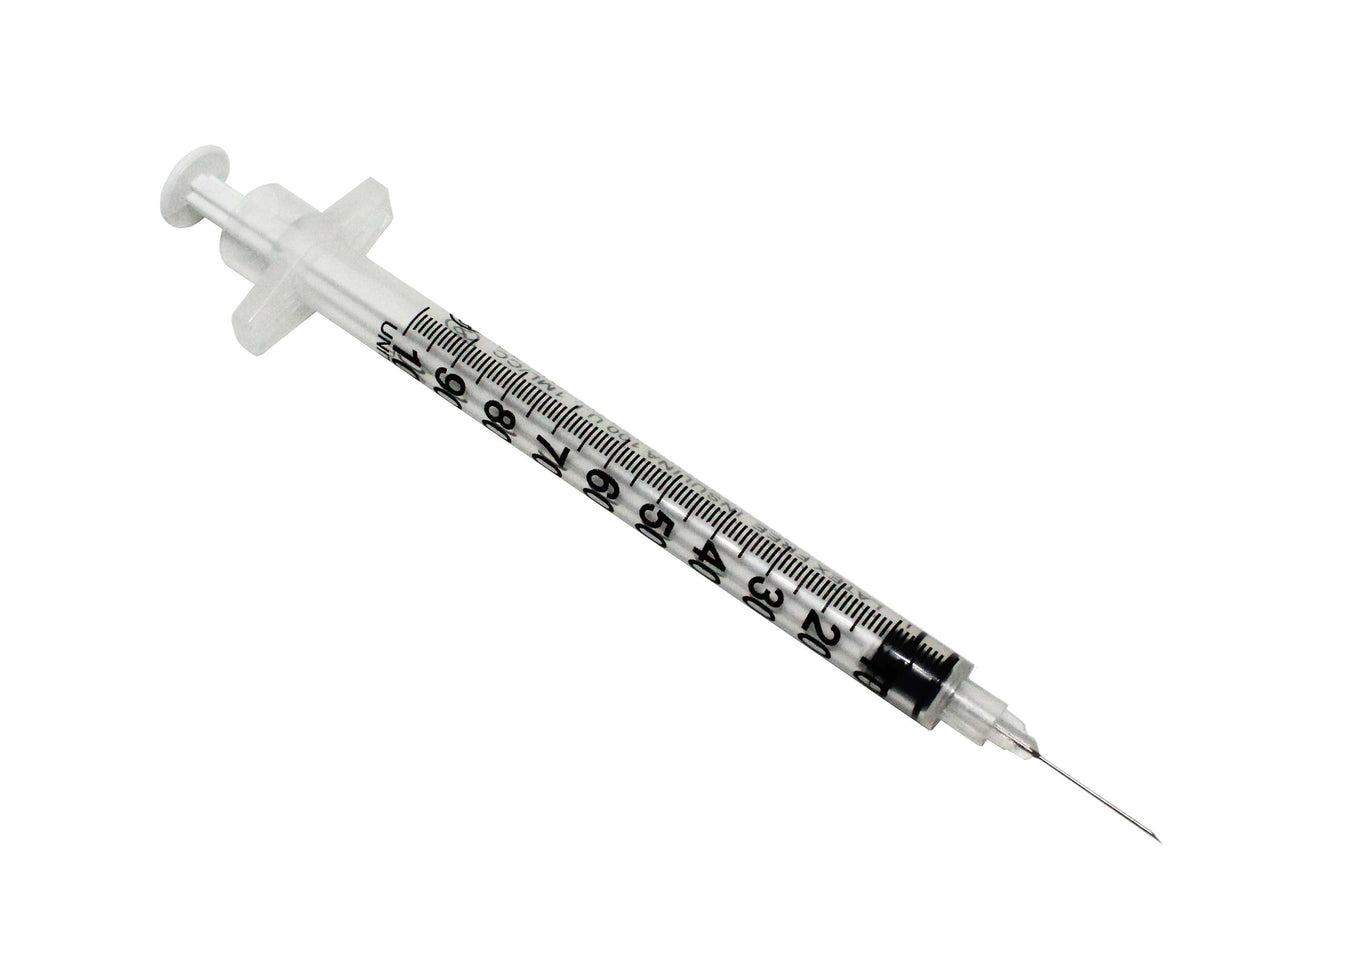 insulin syringe 1ml, 0.5ml and 0.3ml available 29g & 30g for sale in the UK